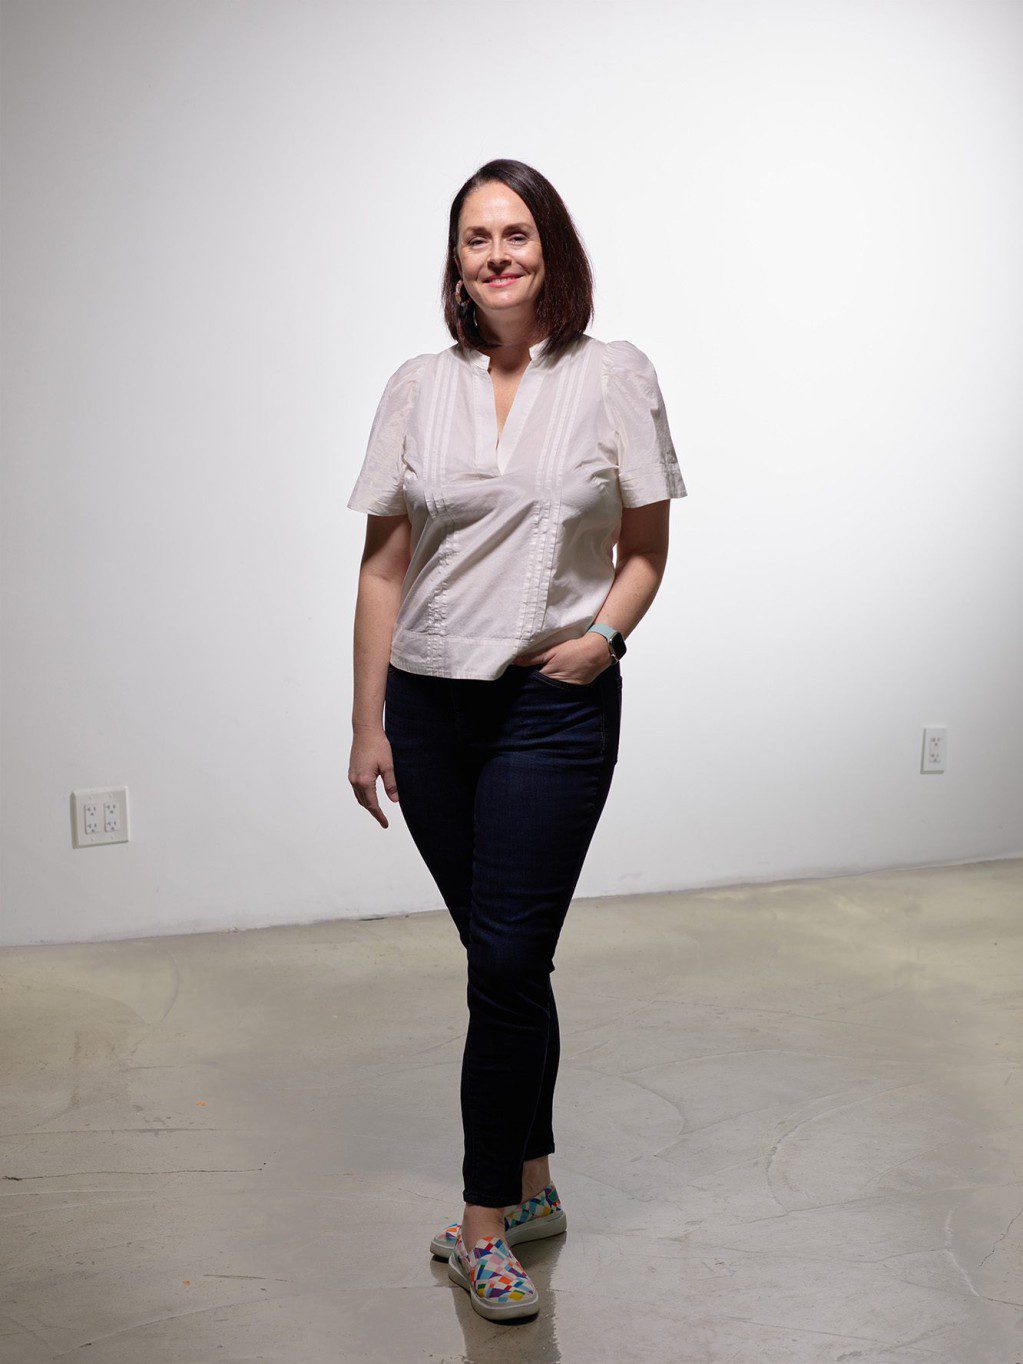 Danae Rees smiles for the camera. She is a white presenting woman with pale skin, medium length dark brown hair, and brown eyes. She is tall and slightly curve. She wears a crisp white top with dangly earrings and blue jeans.